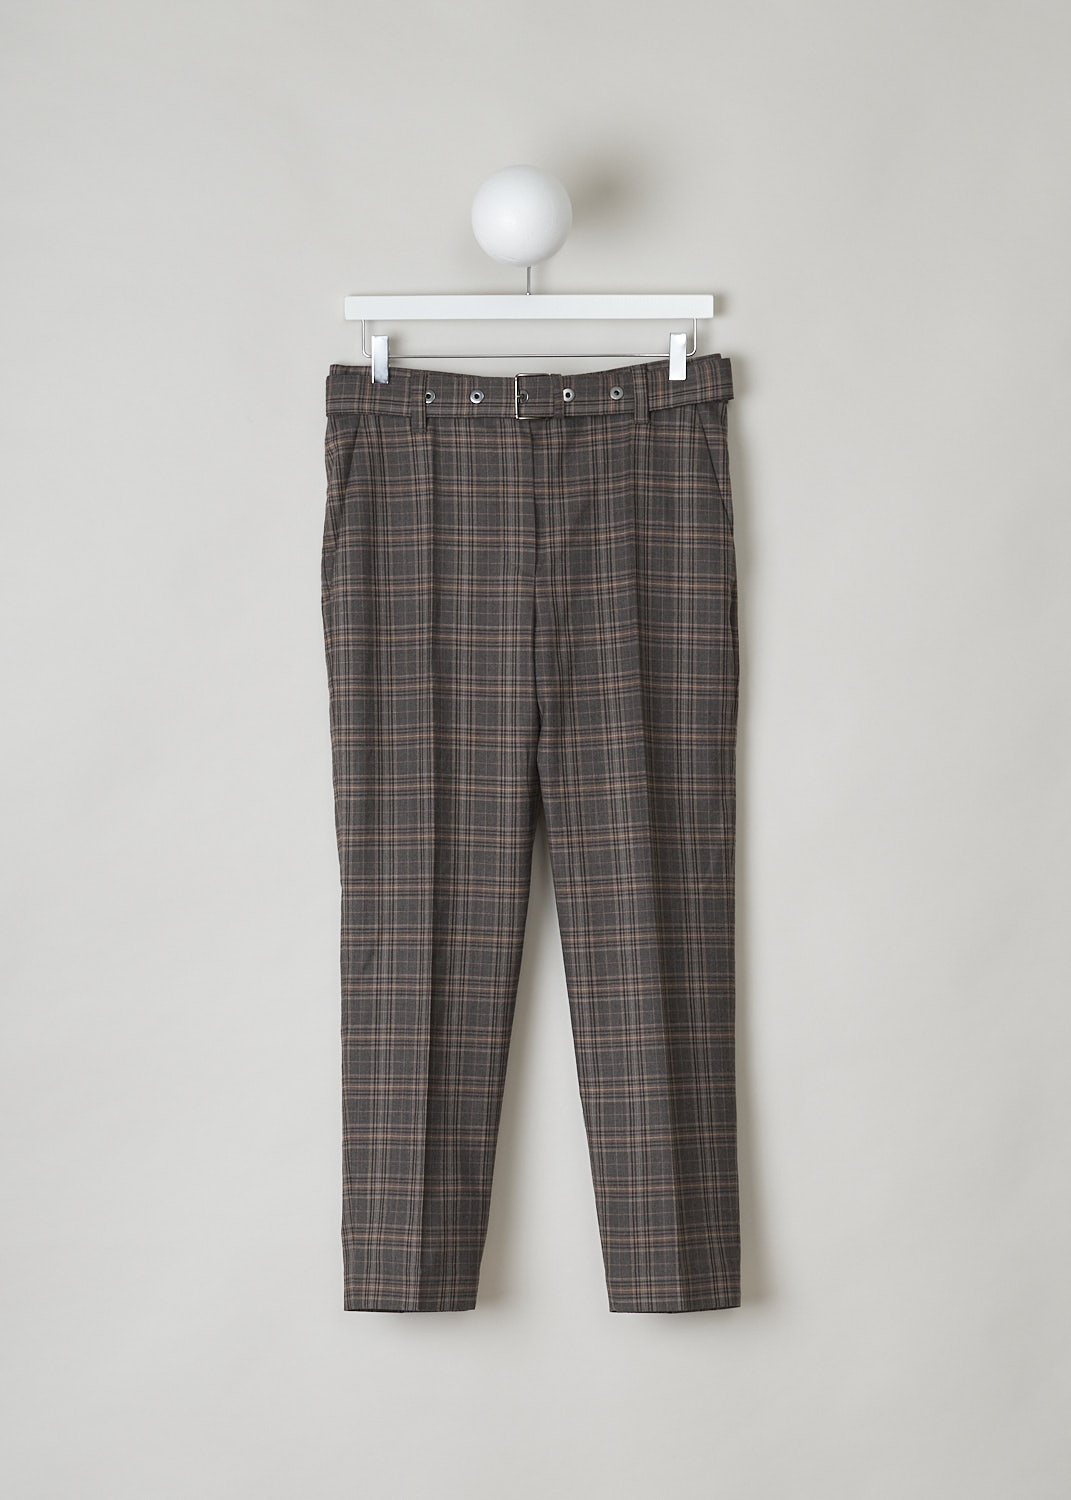 BRUNELLO CUCINELLI, BROWN CHECKERED PANTS WITH BELT, MA143P7055_C001, Brown, Print, Front, These brown checkered pants come with a detachable belt in the same fabric with a metal belt buckle. The pants have tapered pant legs with pressed centre creases. These pants have slanted pockets in the front and welt pockets in the back.

